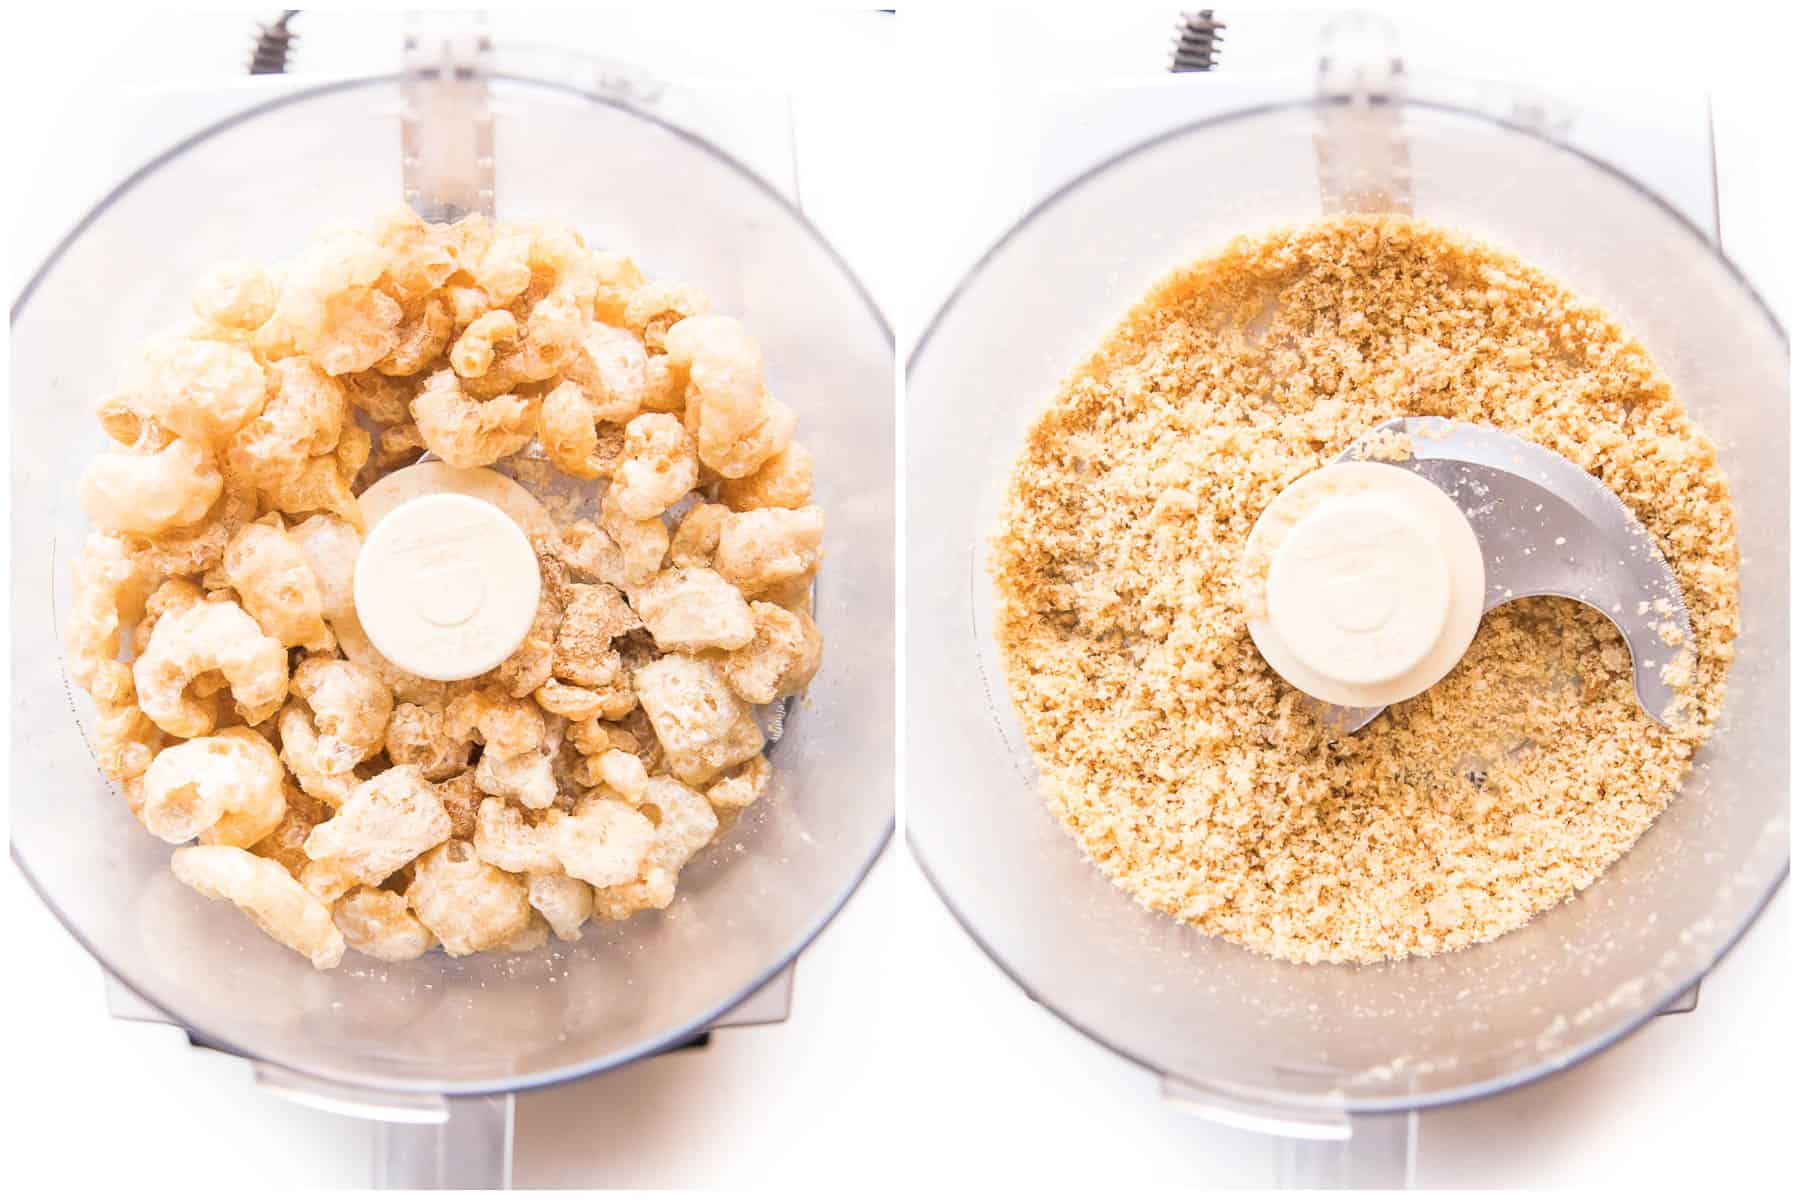 side by side photos of pork panko in a food processor showing before and after